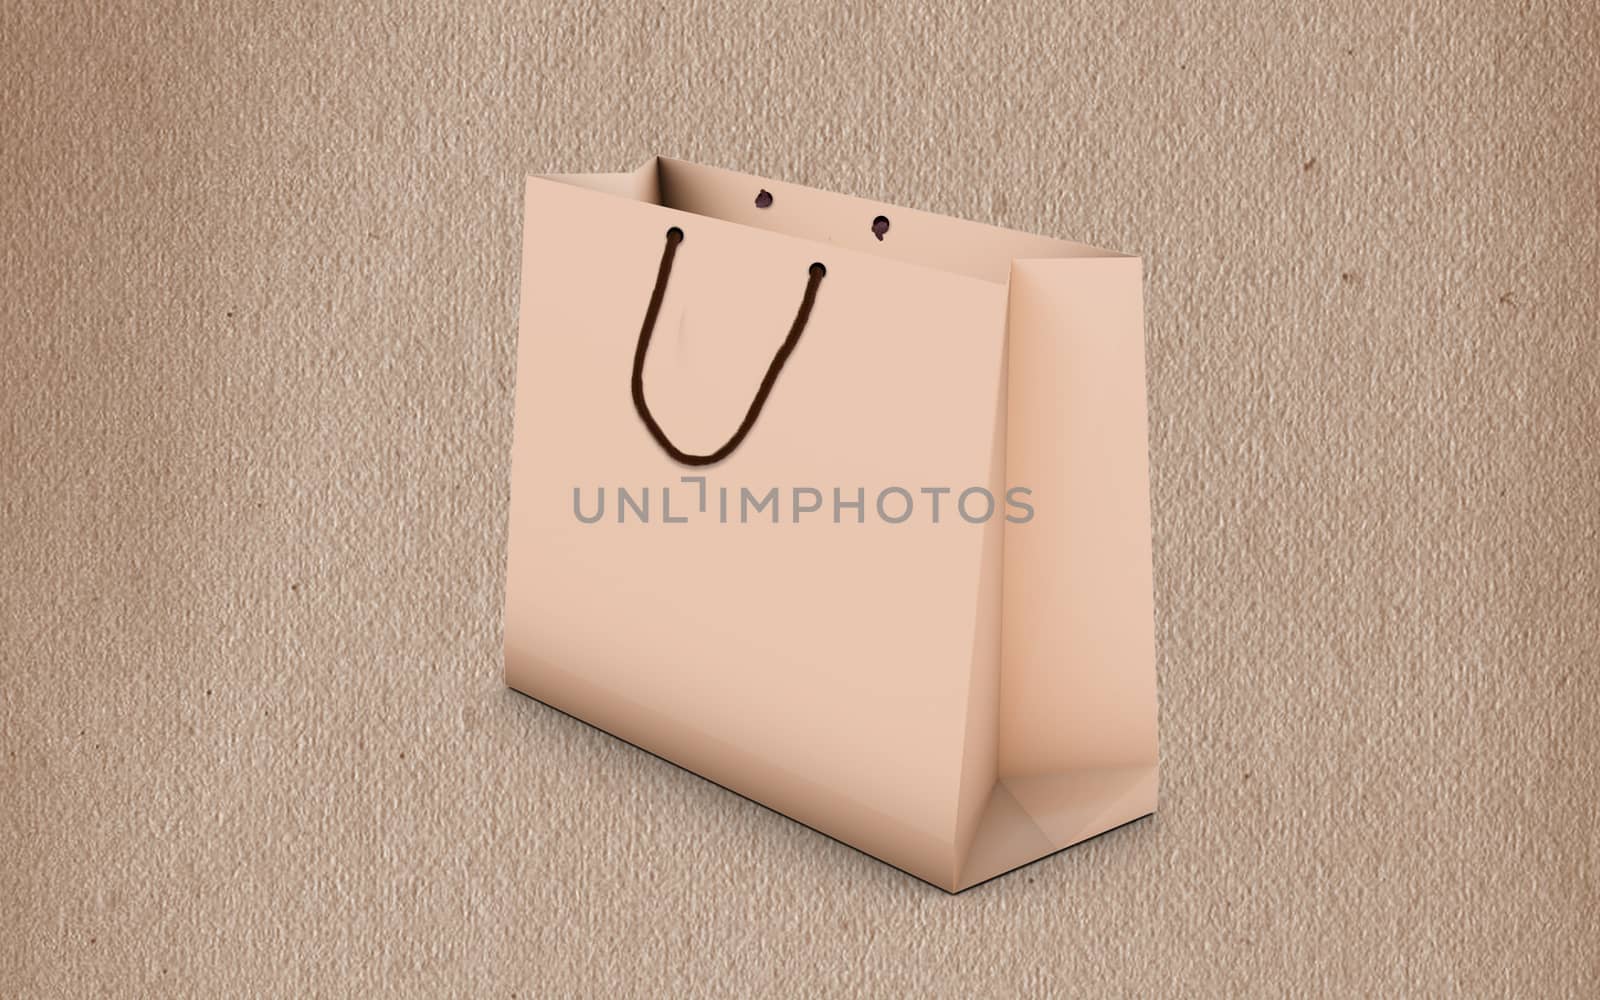 paper bag for shopping on a light background